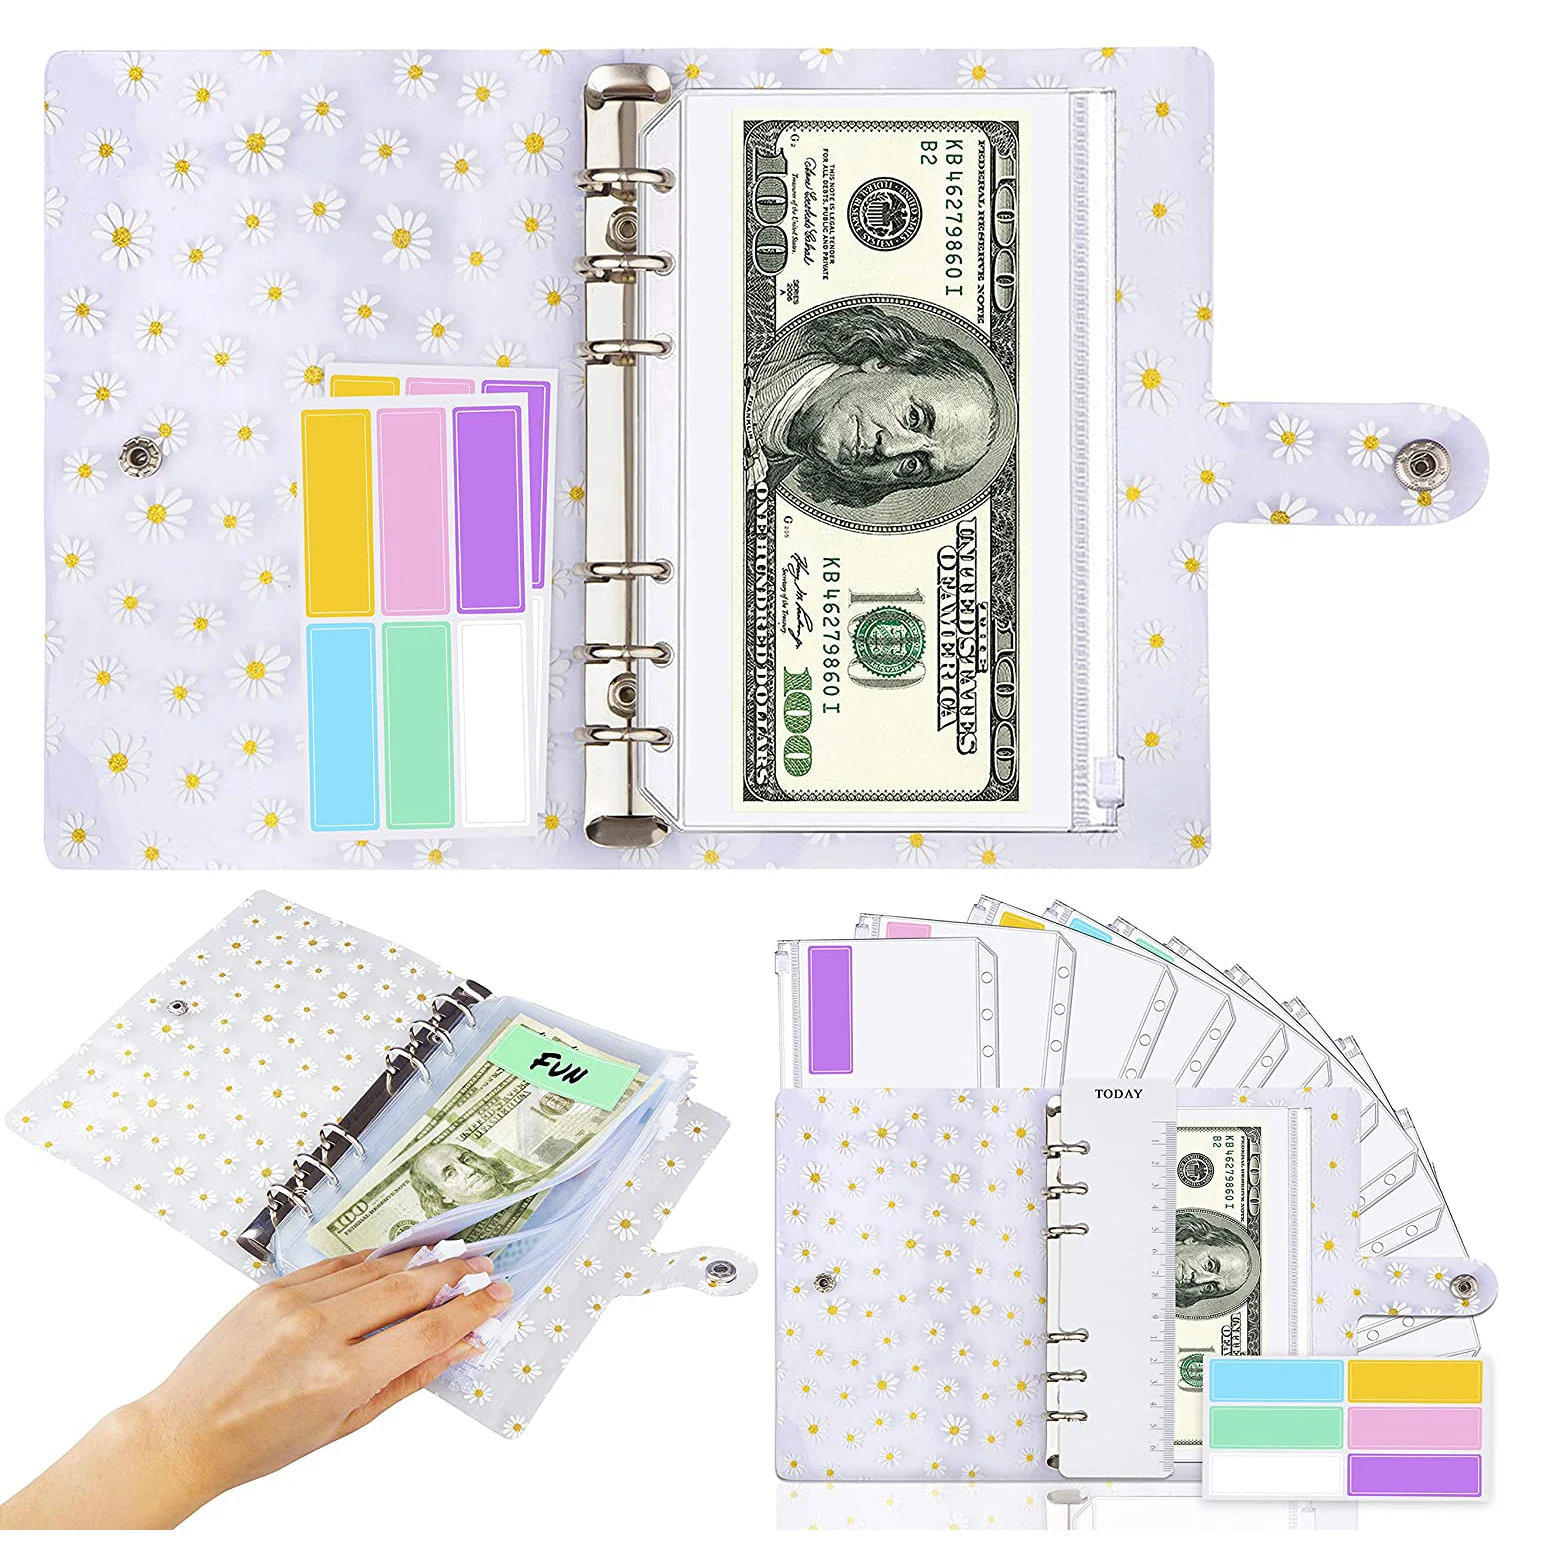 15 Pieces A6 Daisy PVC Binder Cover Budget Planner and 12 Clear Binder Pockets Organizer,Colored Labels for Budgeting frank j fabozzi capital budgeting theory and practice